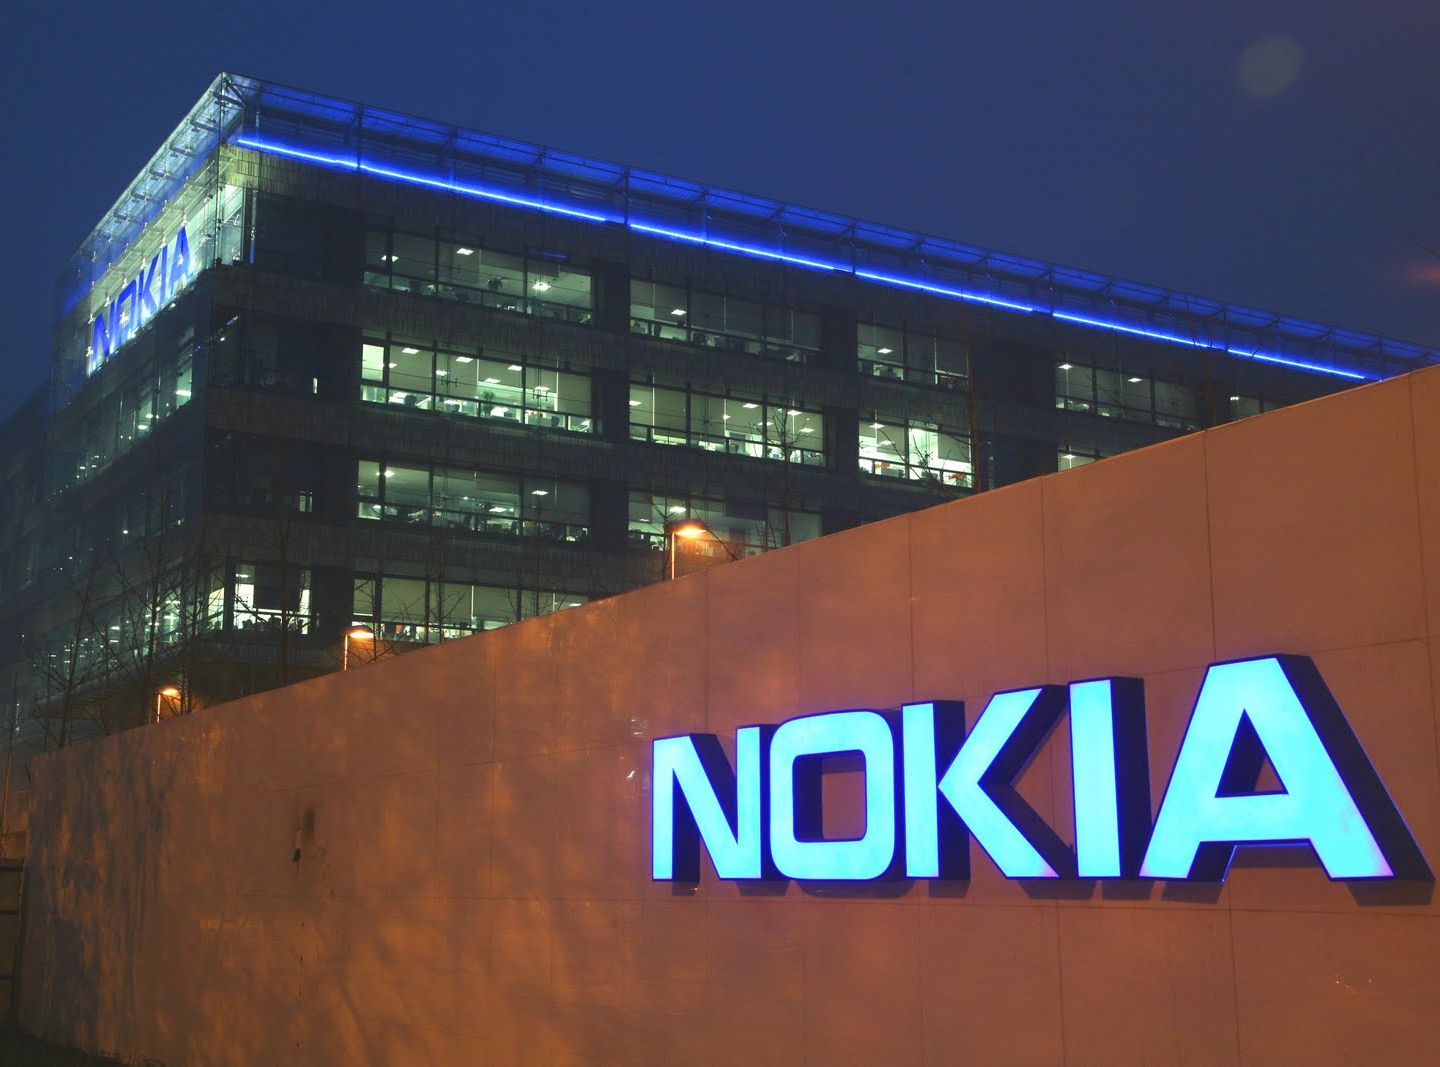 Nokia Photo Hackathon: For Young Developers – Get Trigger Happy!